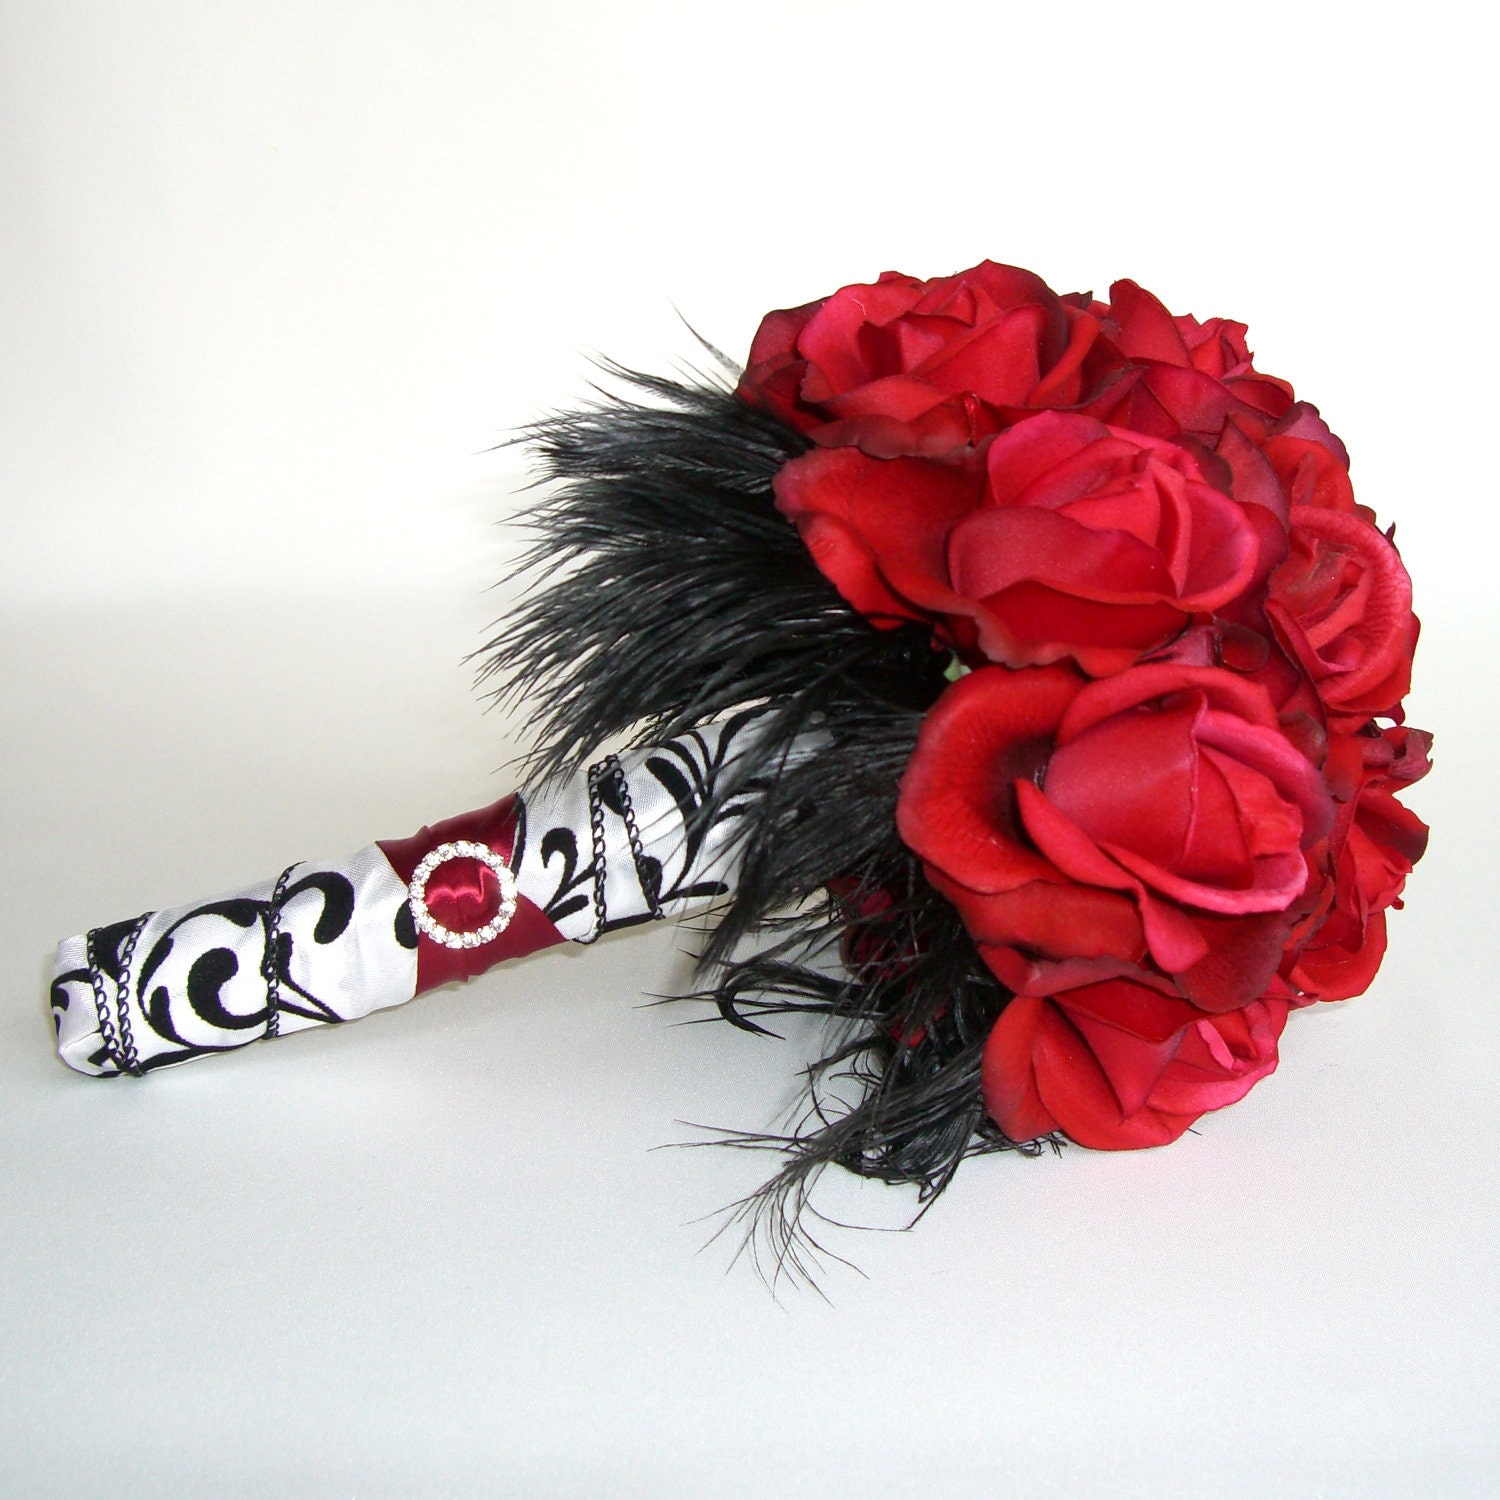 red black and white wedding decorations